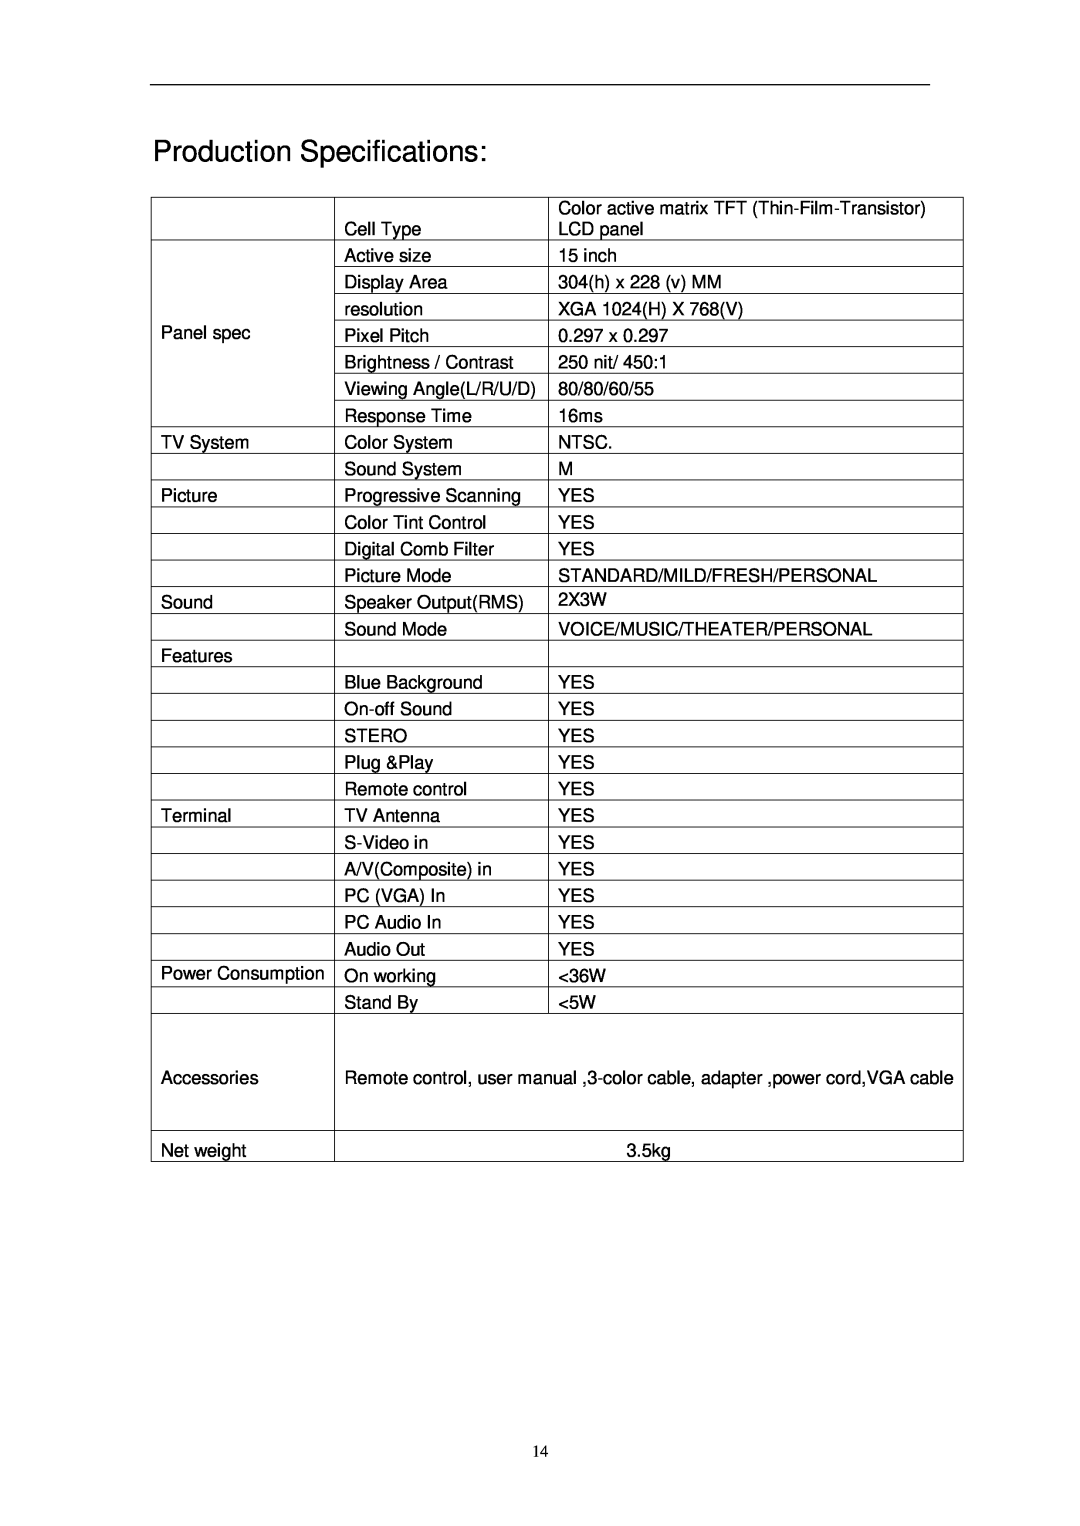 Curtis LCD1575 manual Production Specifications 